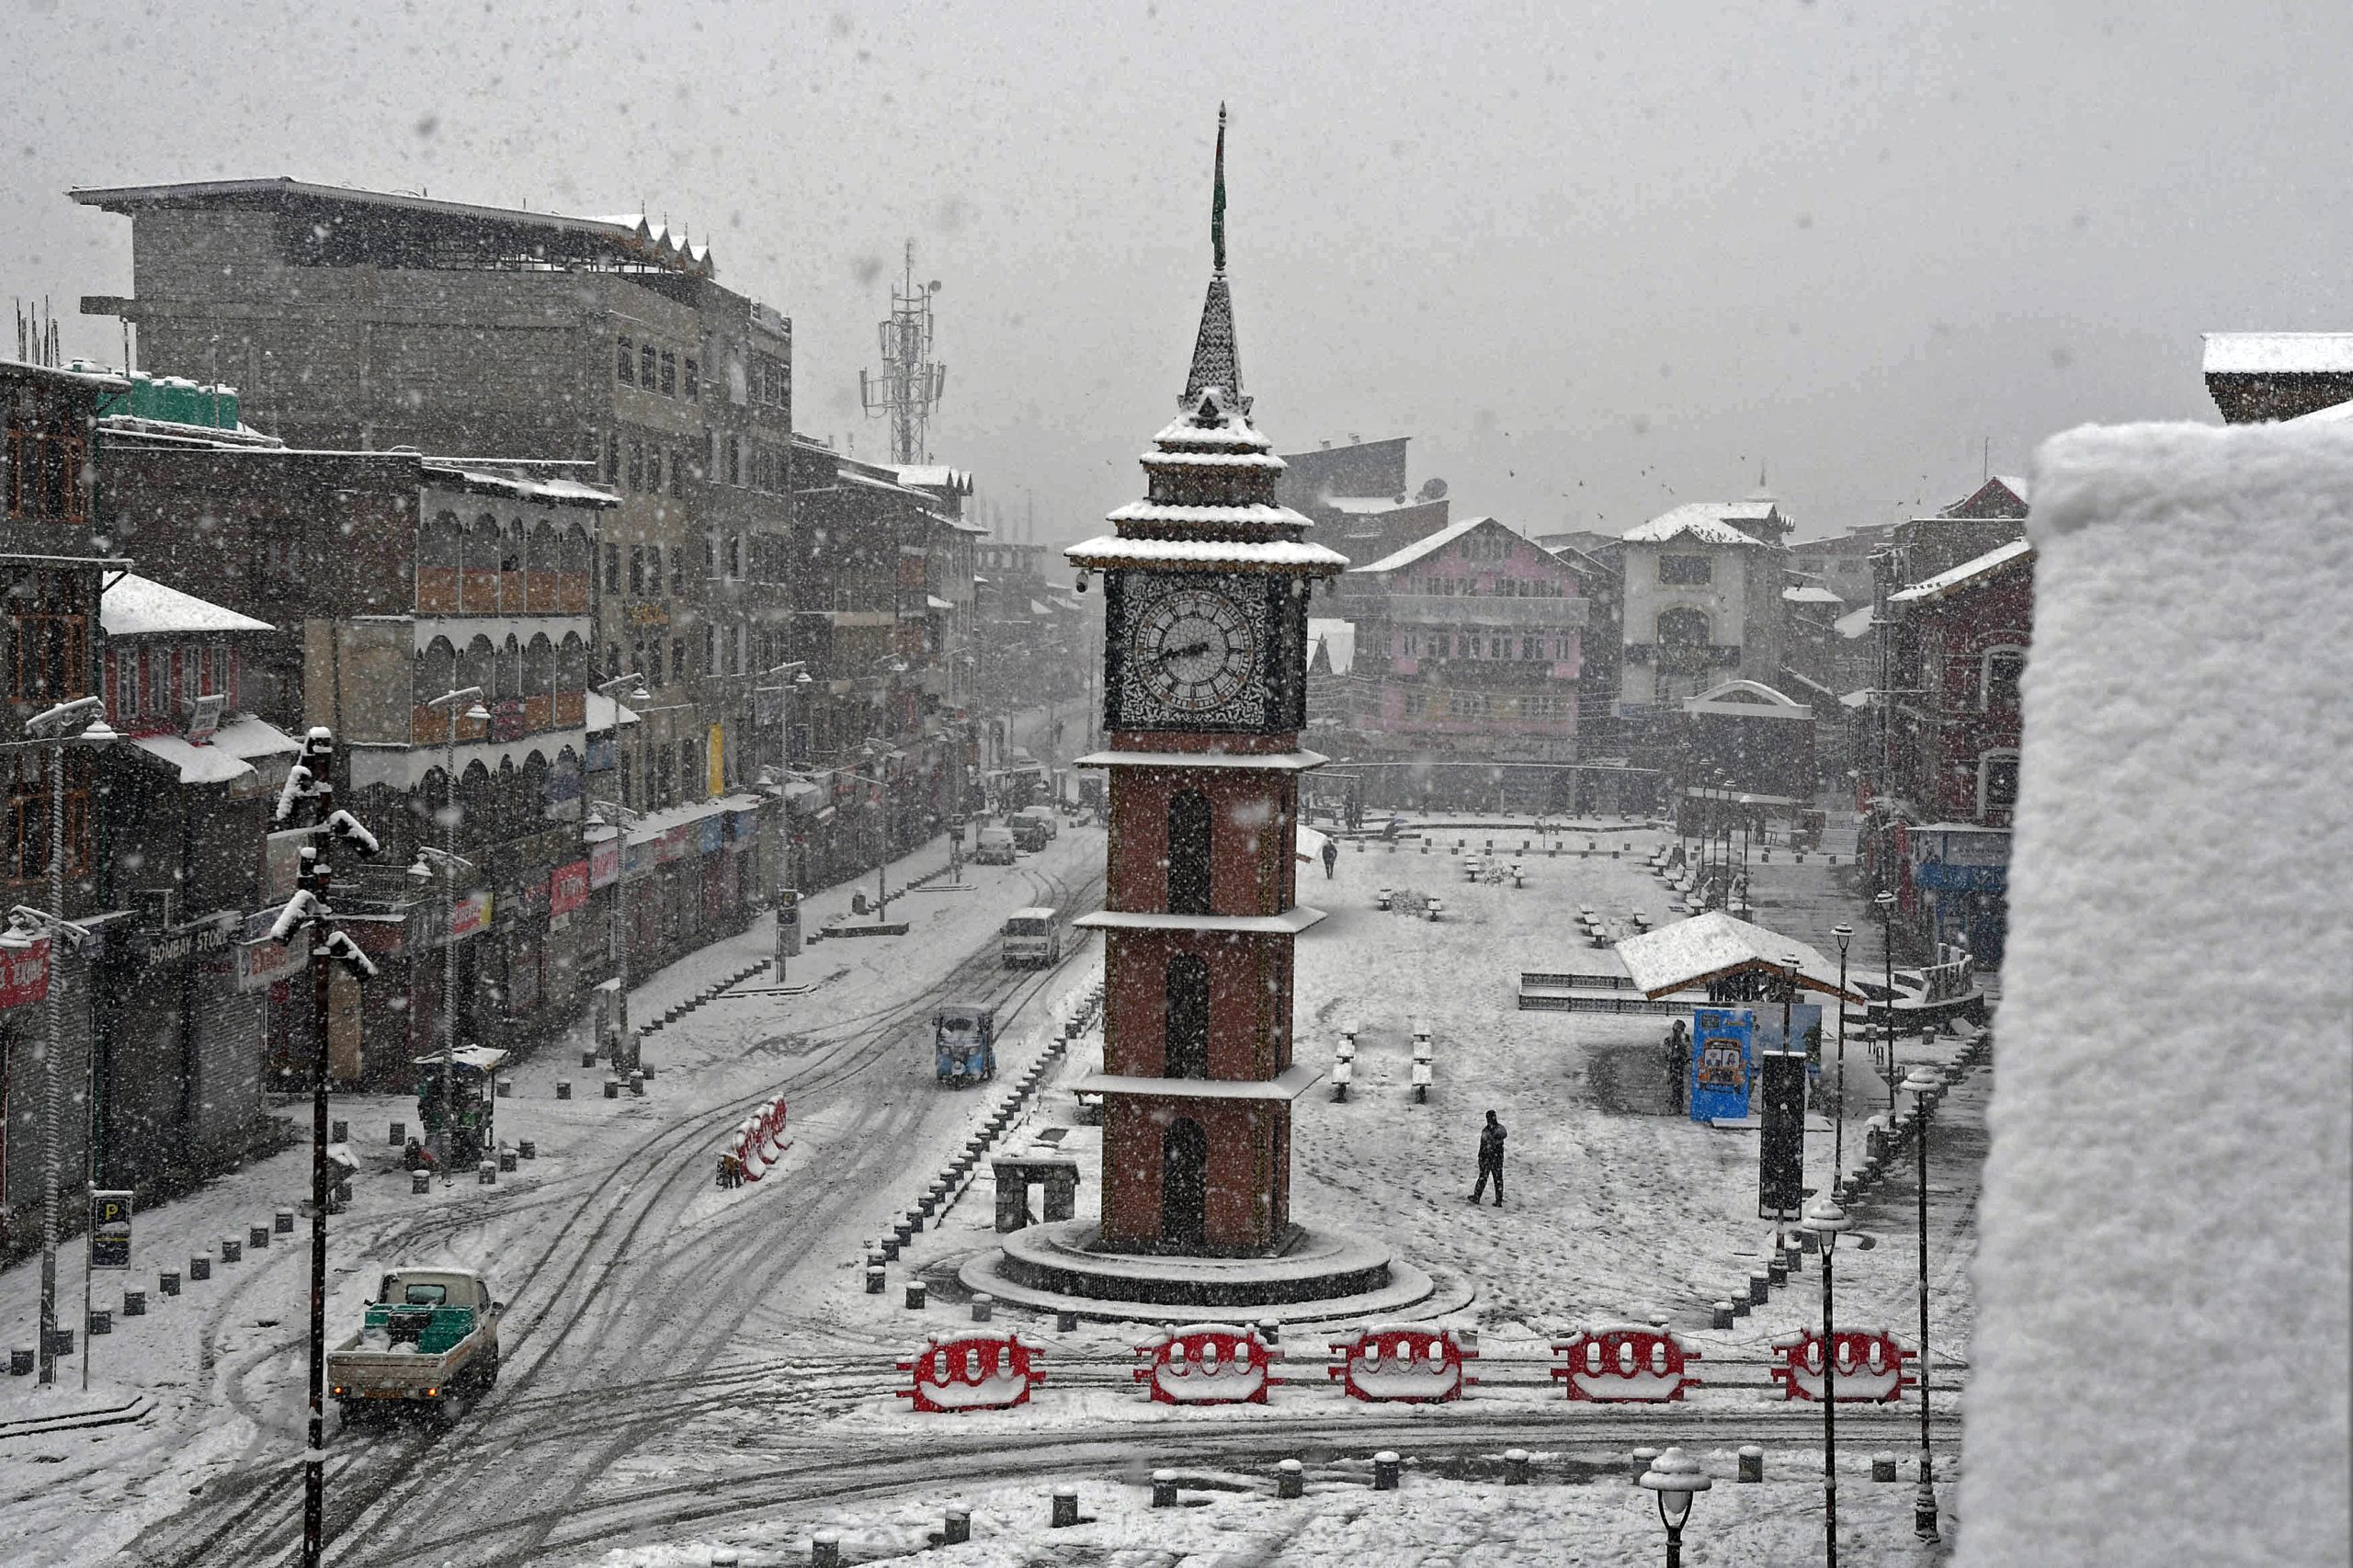 Snowfall warning issued for Jammu and Kashmir, travelers advised caution